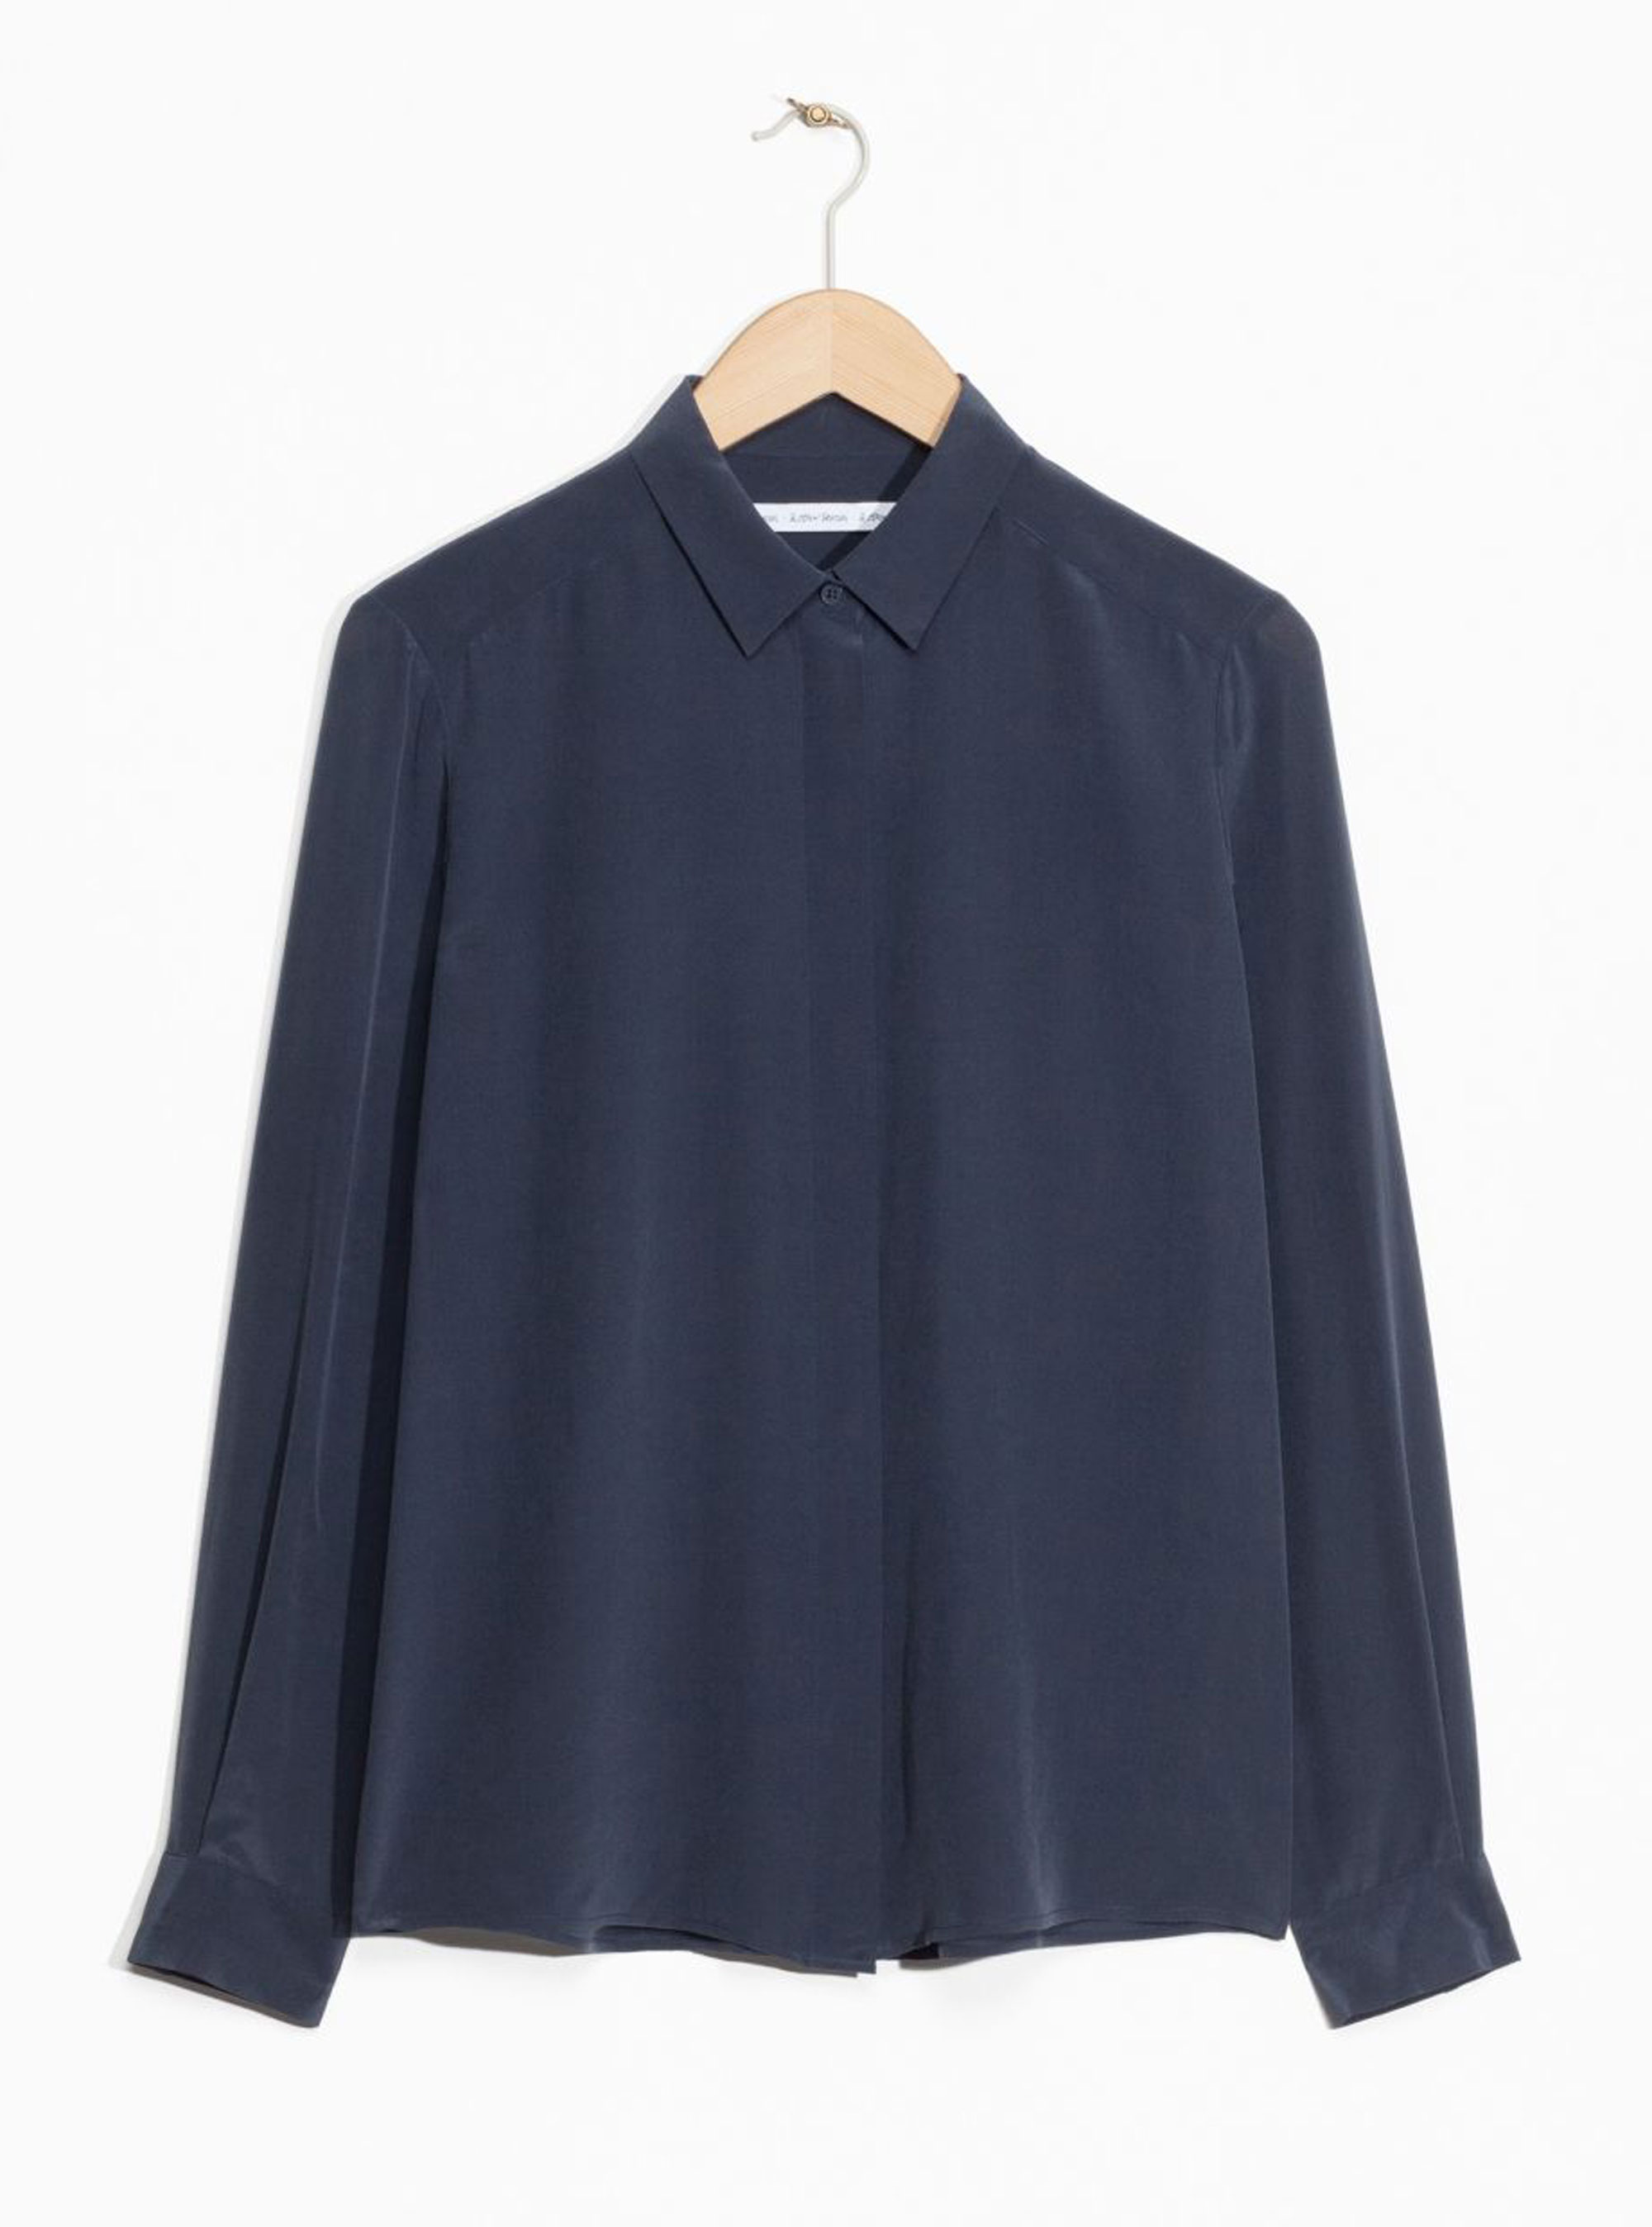 workwear - Silk shirt, £65, & Other Stories - Woman And Home